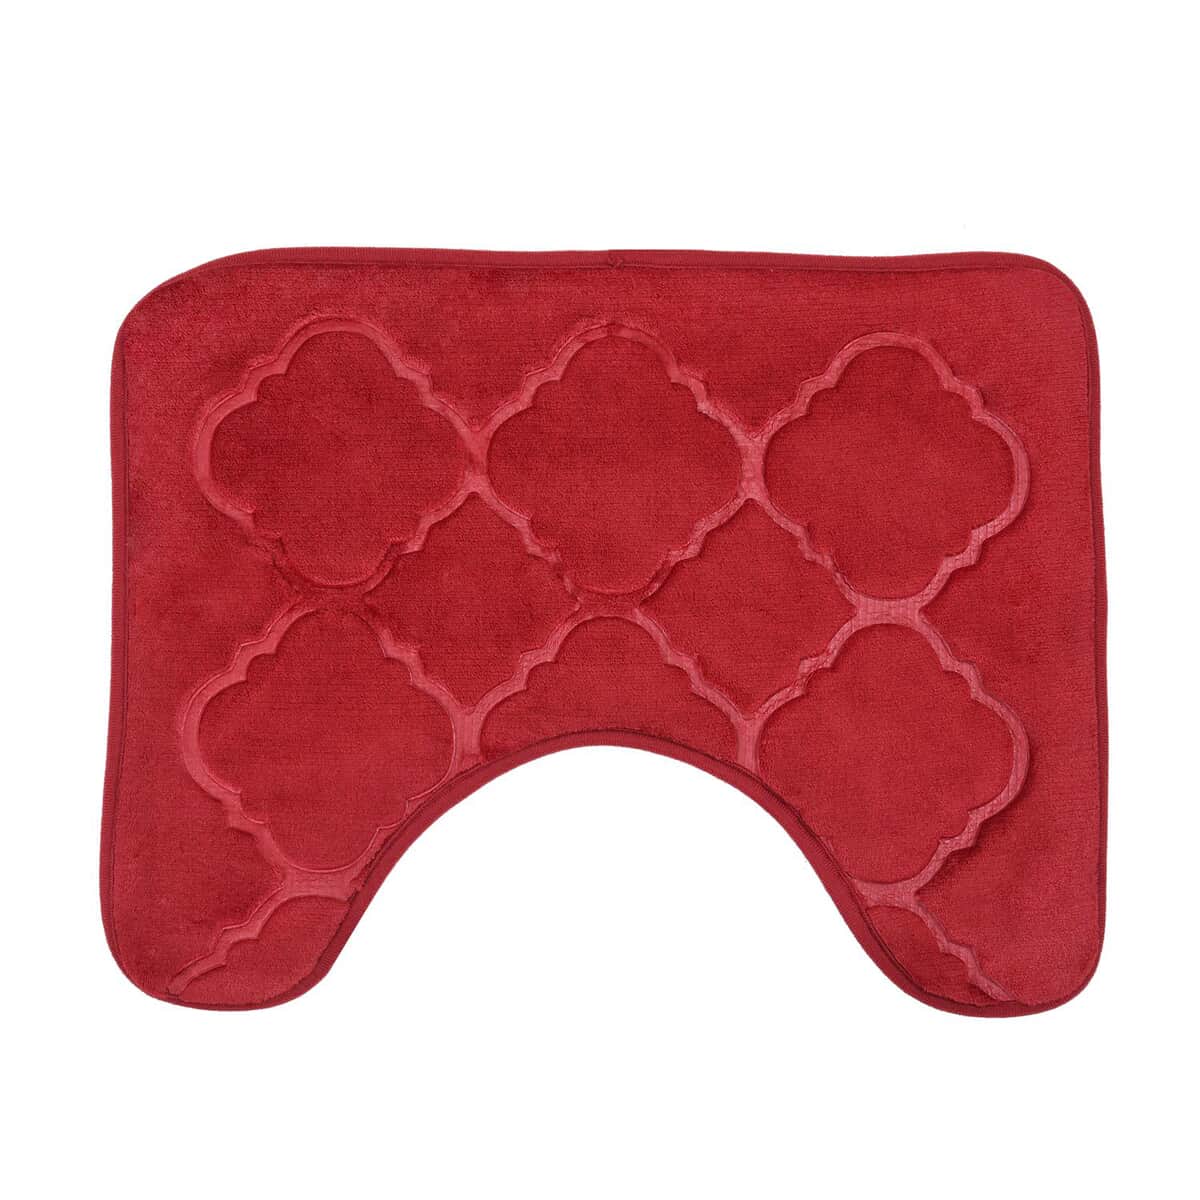 Homesmart Red Embossed Flannel Non-Woven Anti Slip Dot Backing Bath Mat and Contour Toilet Mat, Anti-Skid Quick Drying Handwash Bath Mat, Non Slip Bathroom Rug image number 6